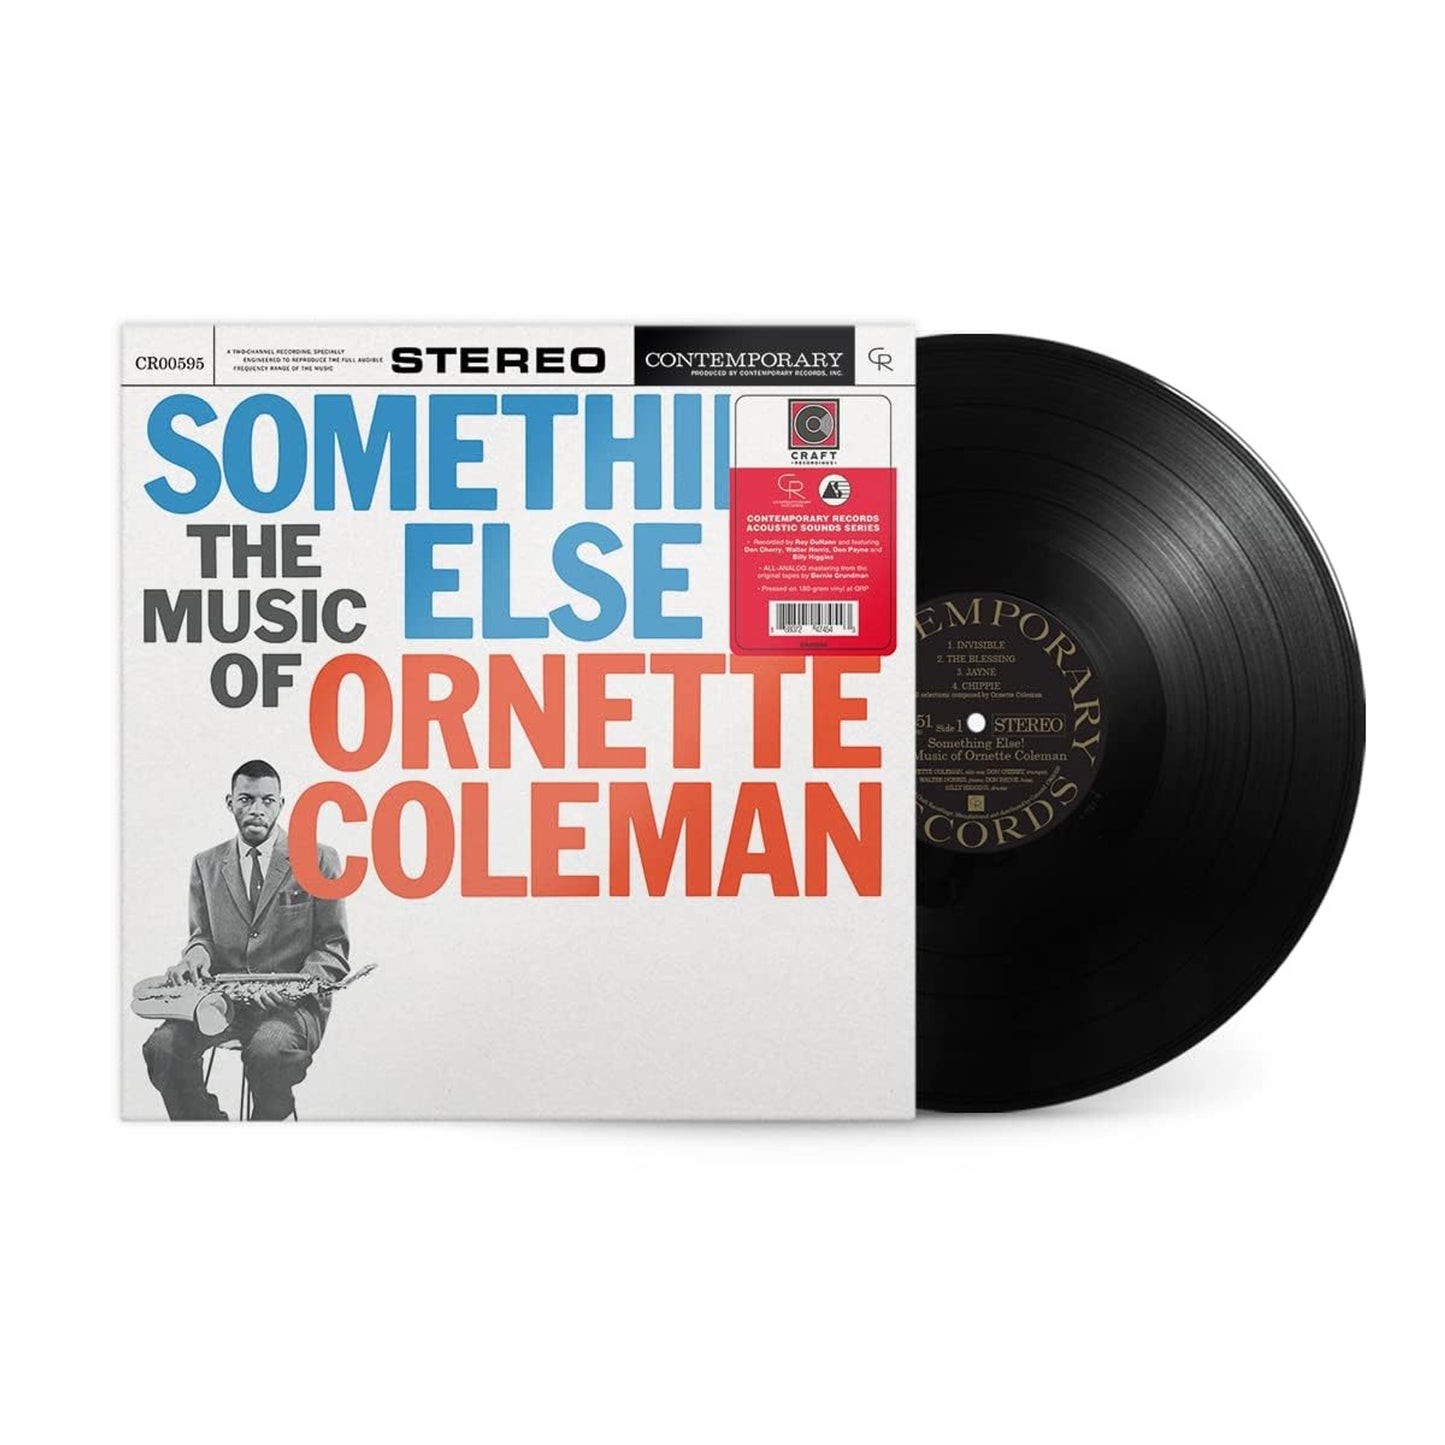 Ornette Coleman - Something Else!: The Music of Ornette Coleman - Contemporary LP